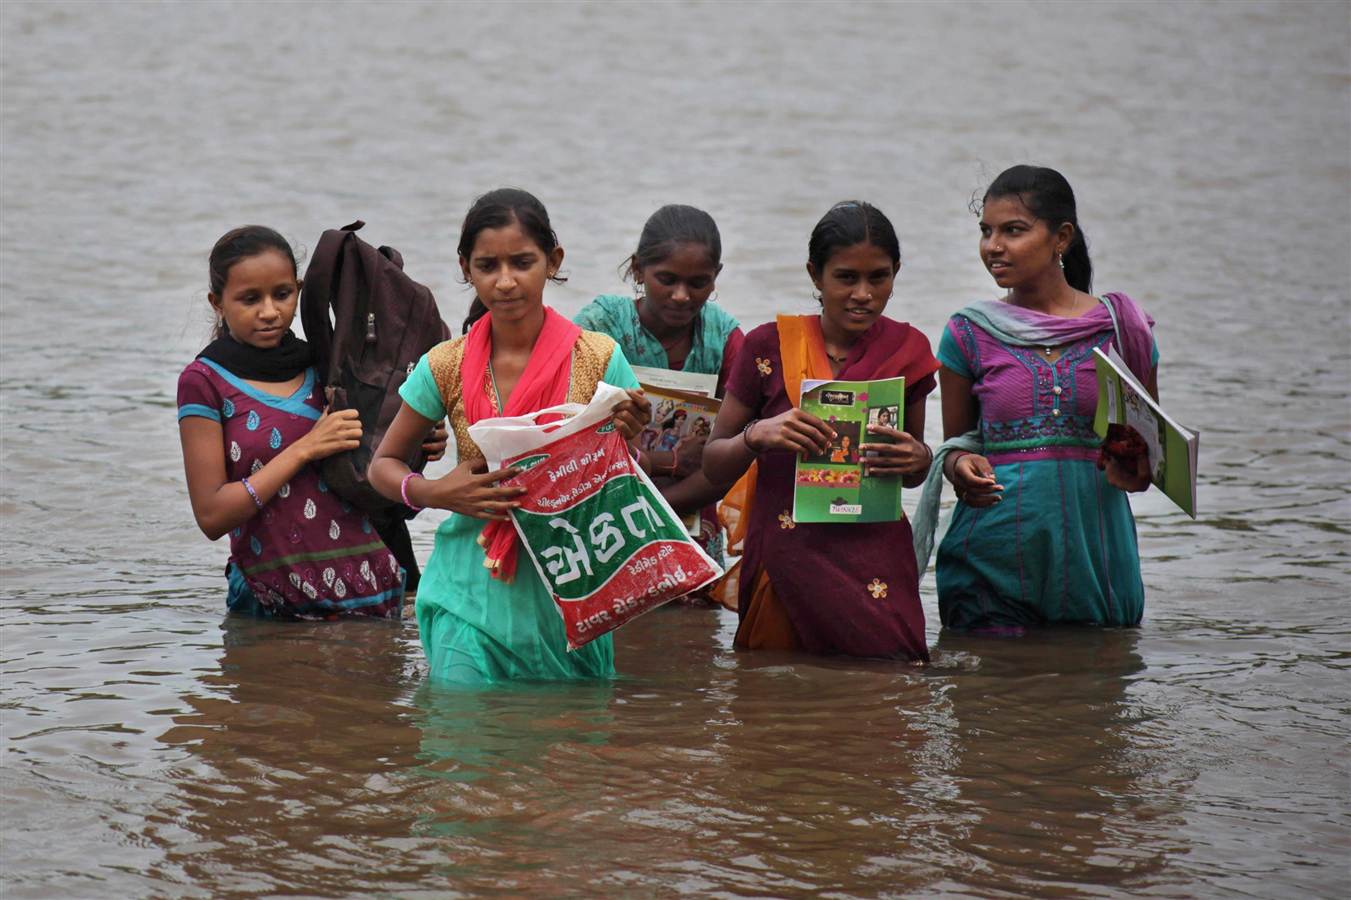 Photo: Associated Press, In Photos: A Rough Road To The Classroom | Leher NGO in India | Child Rights Organization